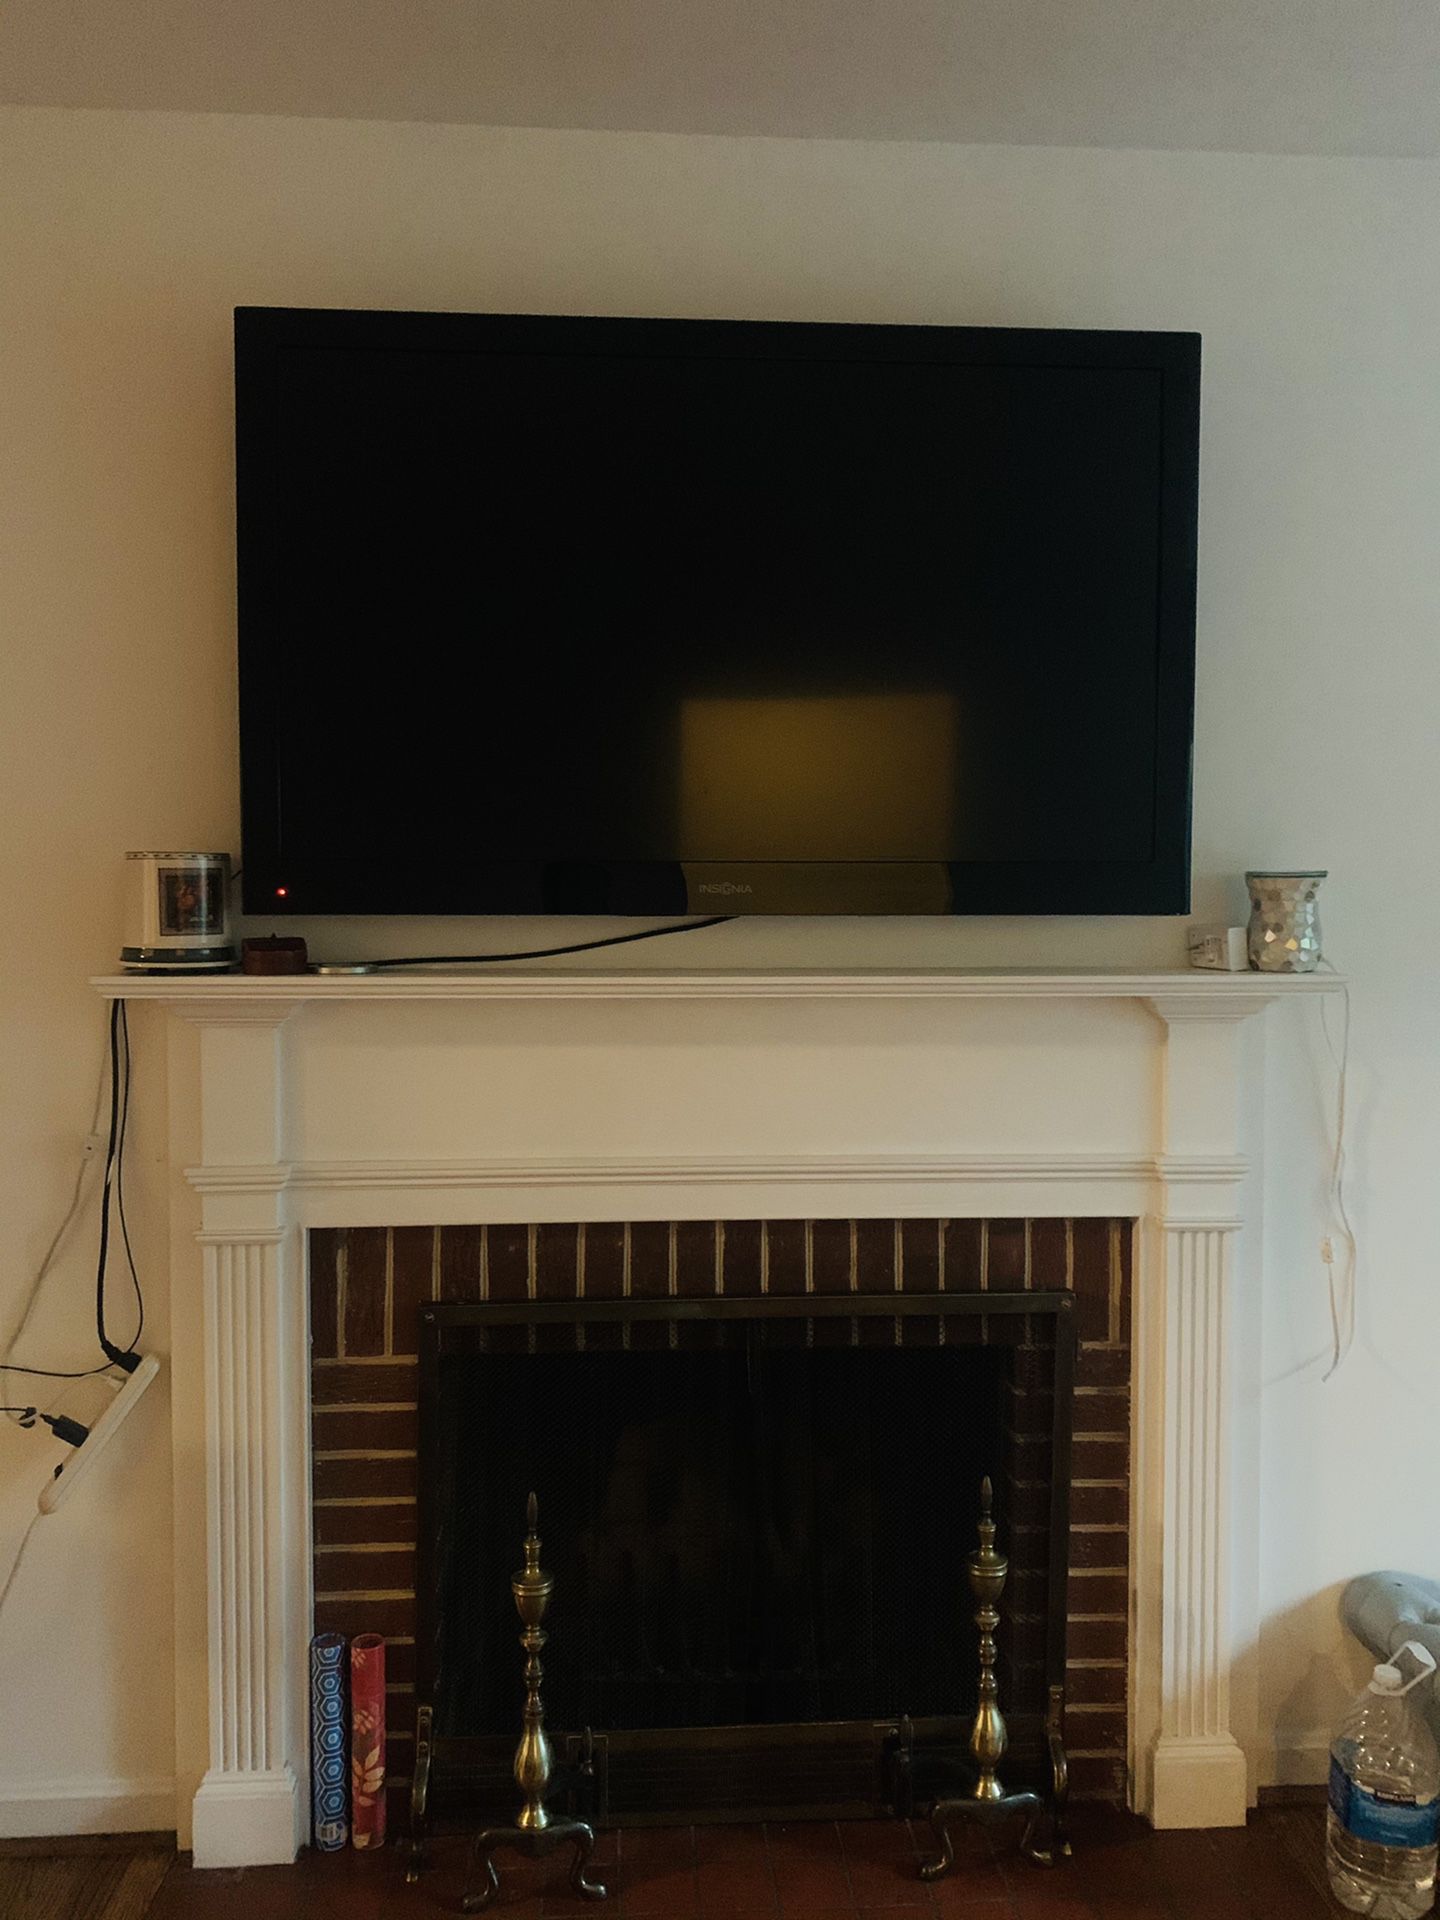 55in tv with chrome cast and wall mount